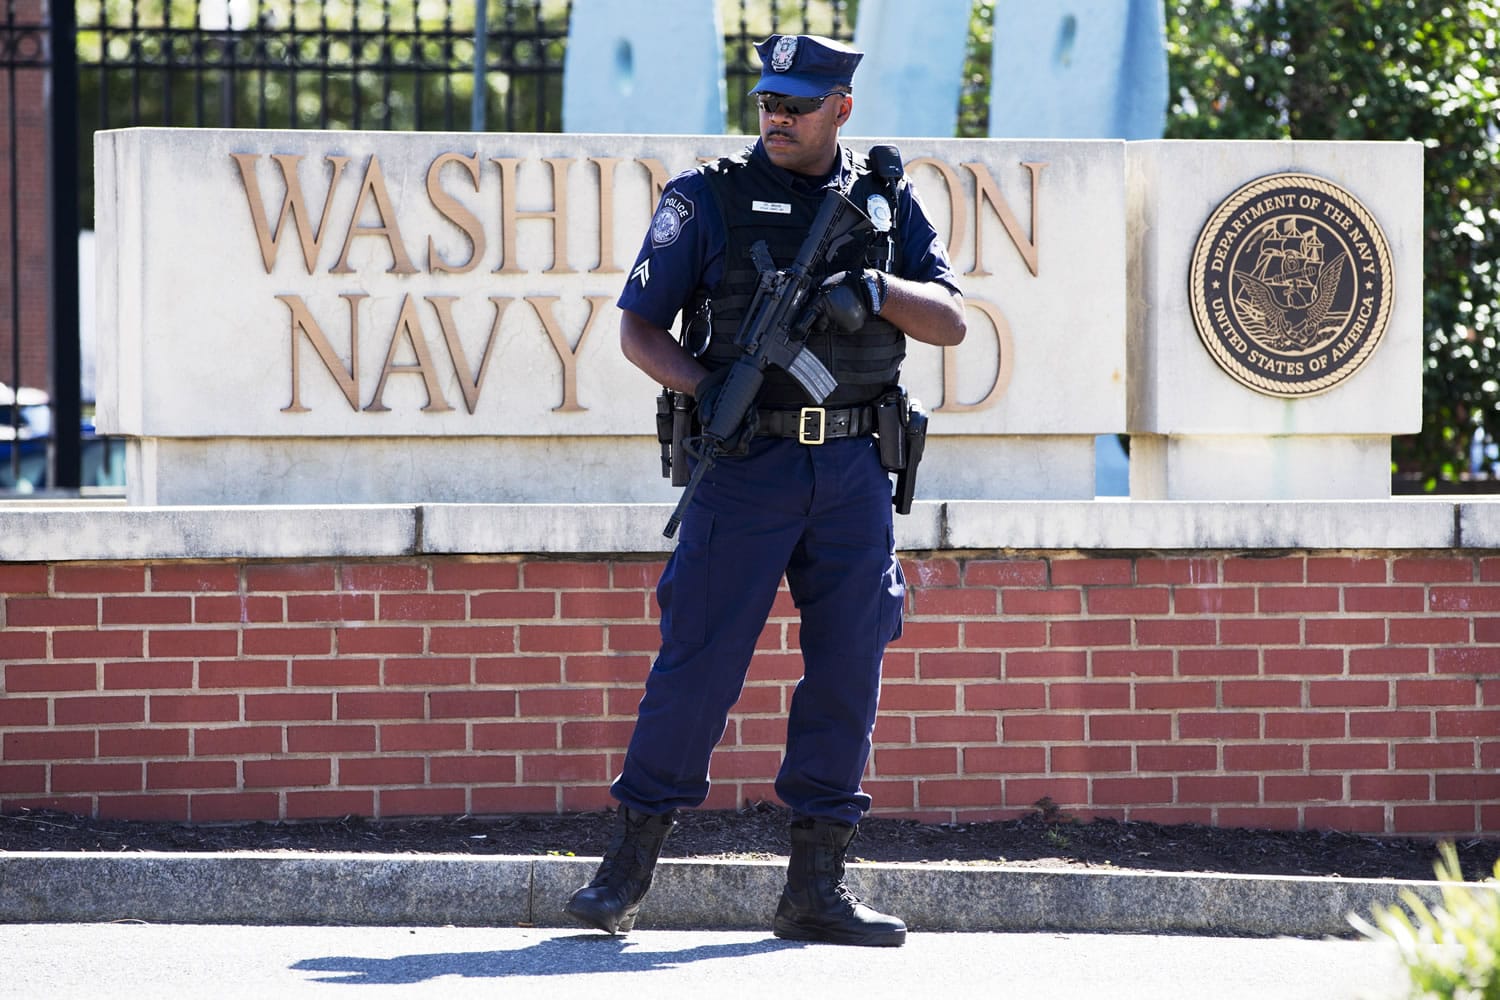 An armed officer who said he is with the Defense Department stands near guard the gate at the Washington Navy Yard the day after a gunman launched an attack inside the Yard in September 2013.